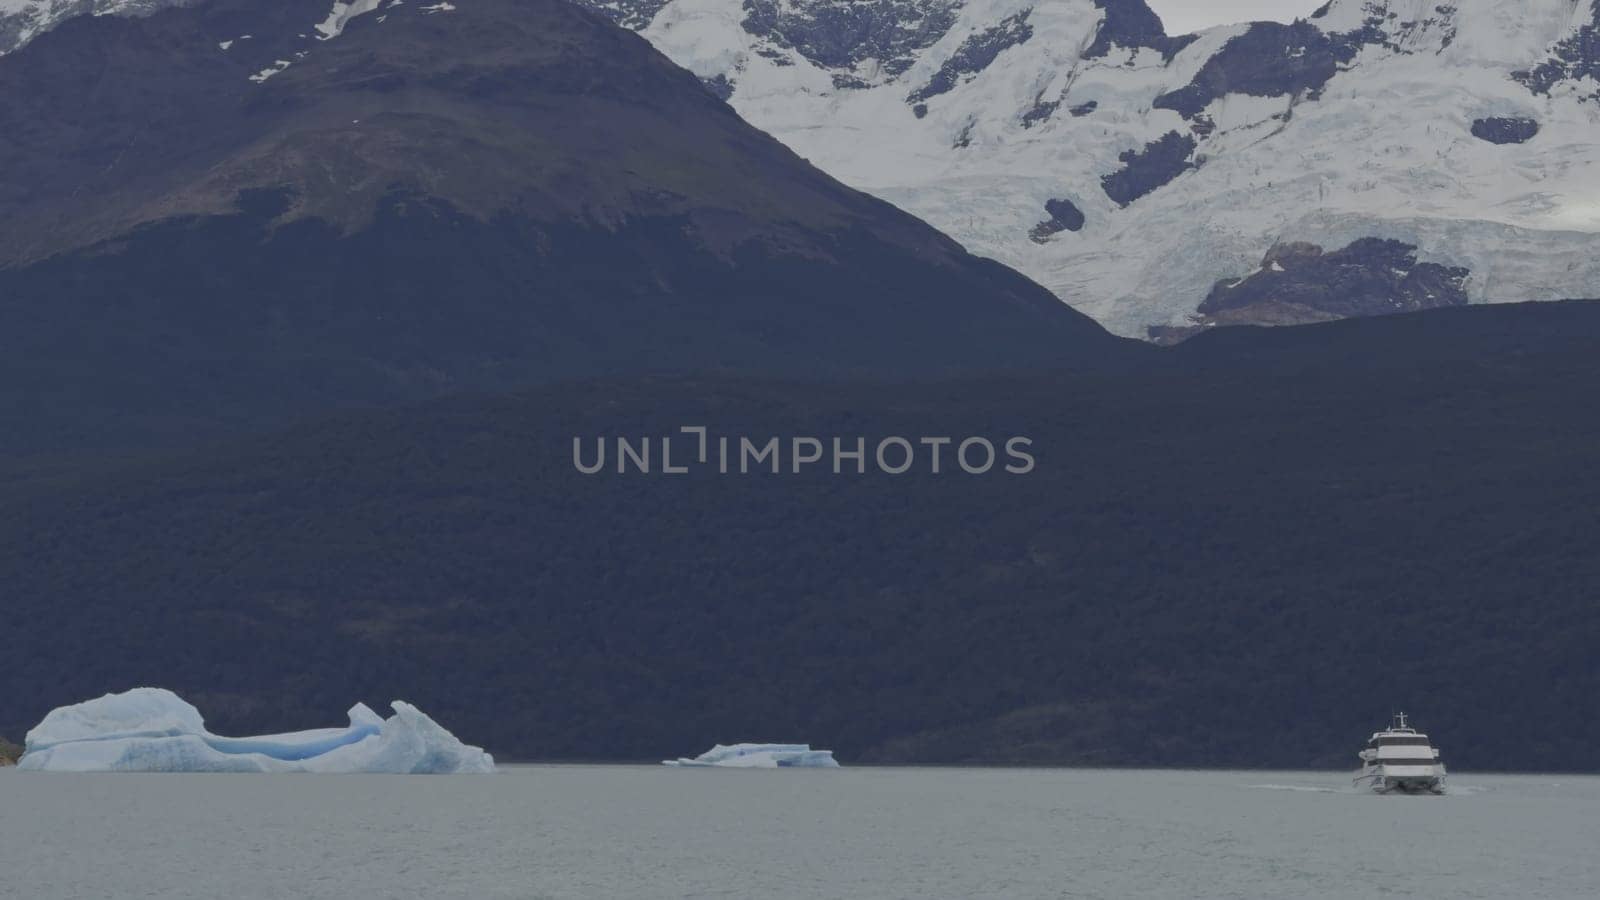 Slow Motion of Tourist Boat Amidst Massive Icebergs on Lake by FerradalFCG